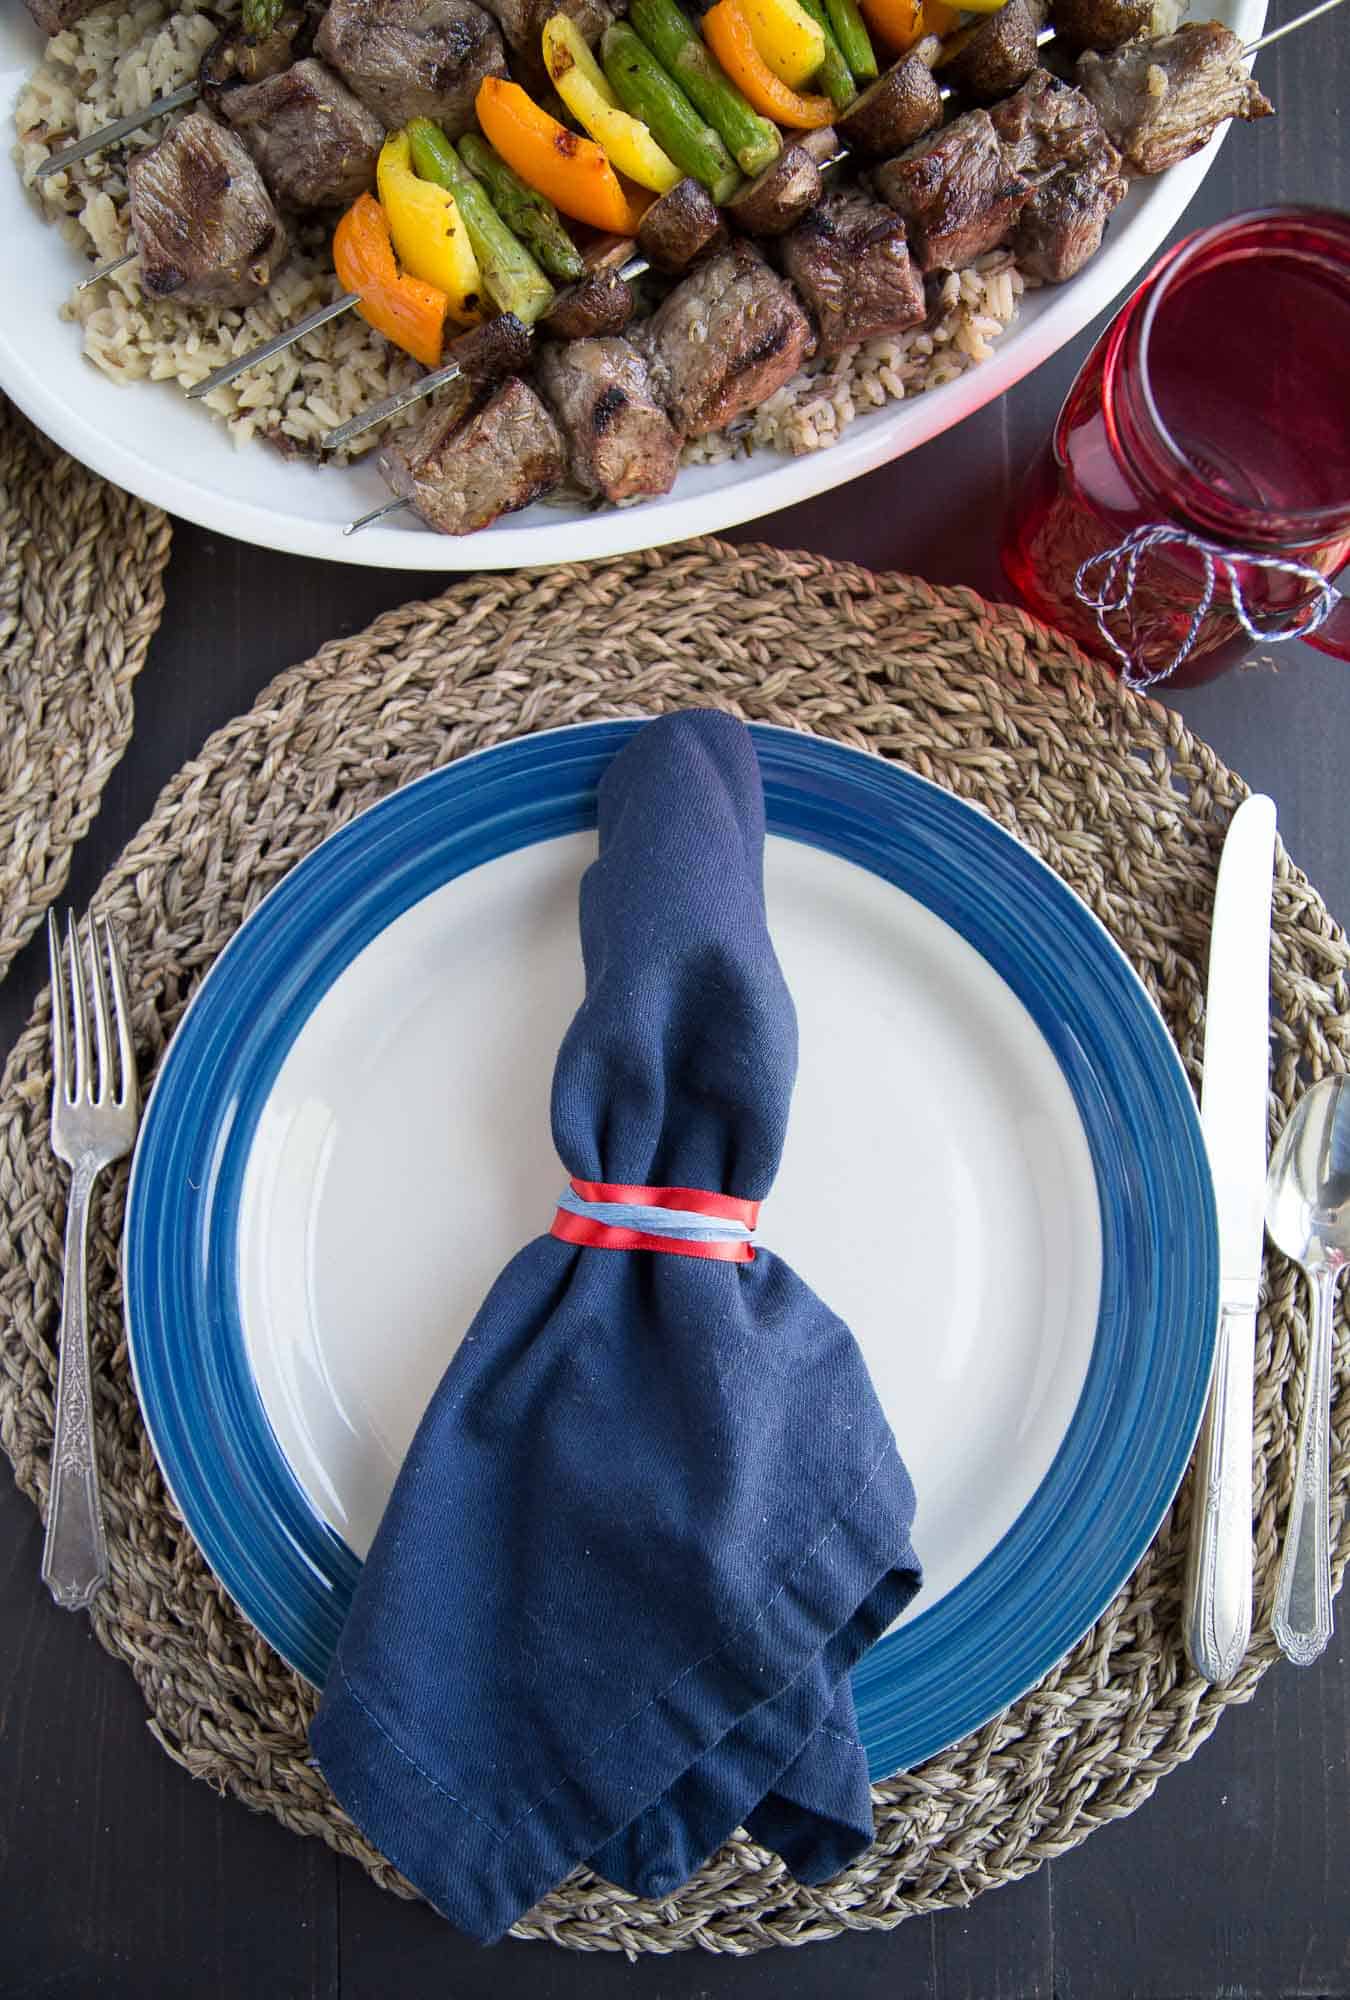 Tablesetting with cloth napkin